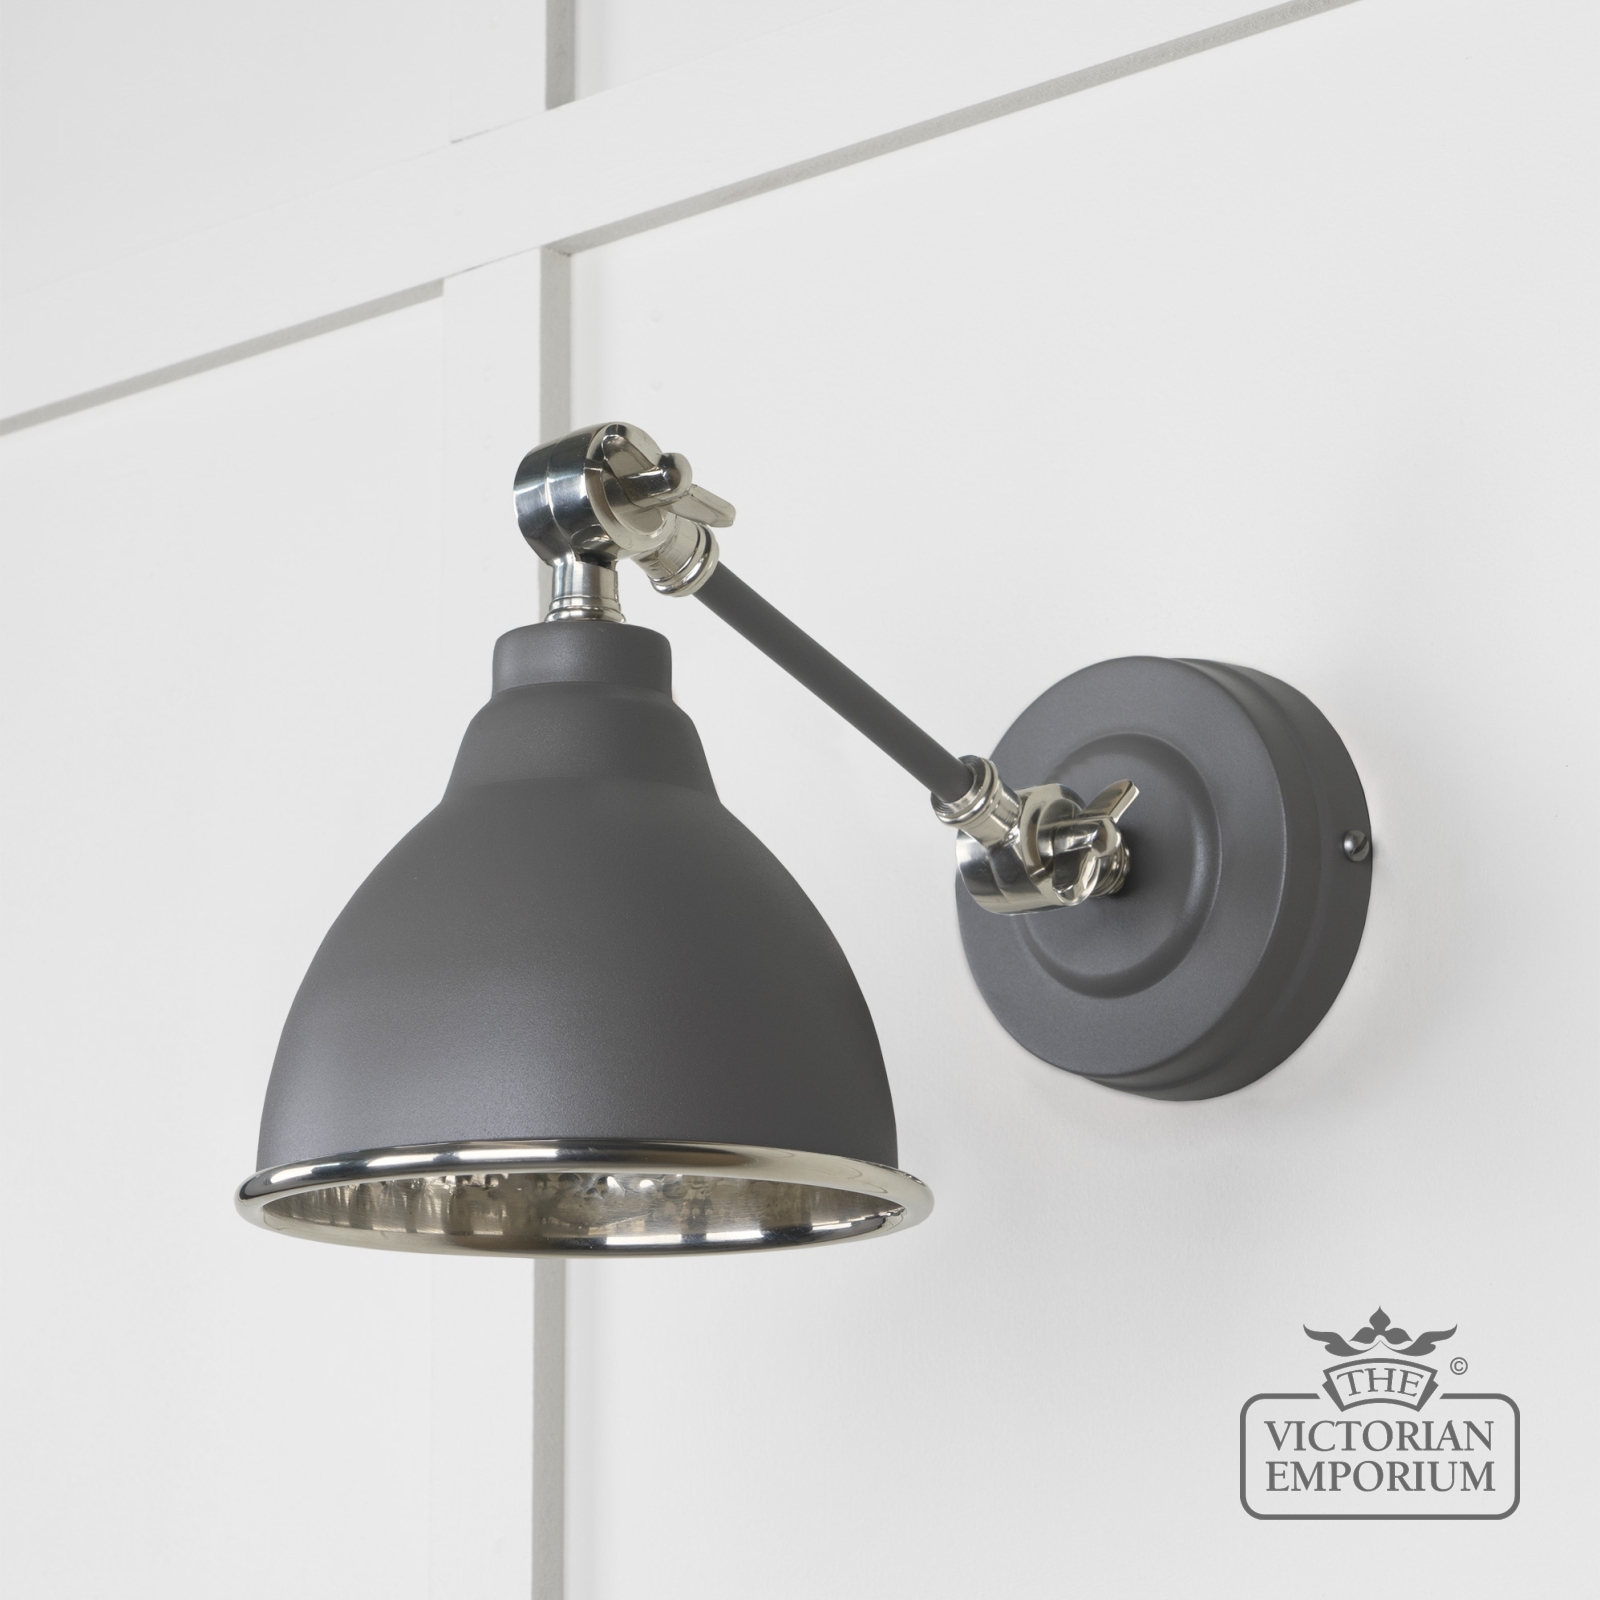 Brindle Wall Light with Hammered Nickel Interior and Bluff Exterior